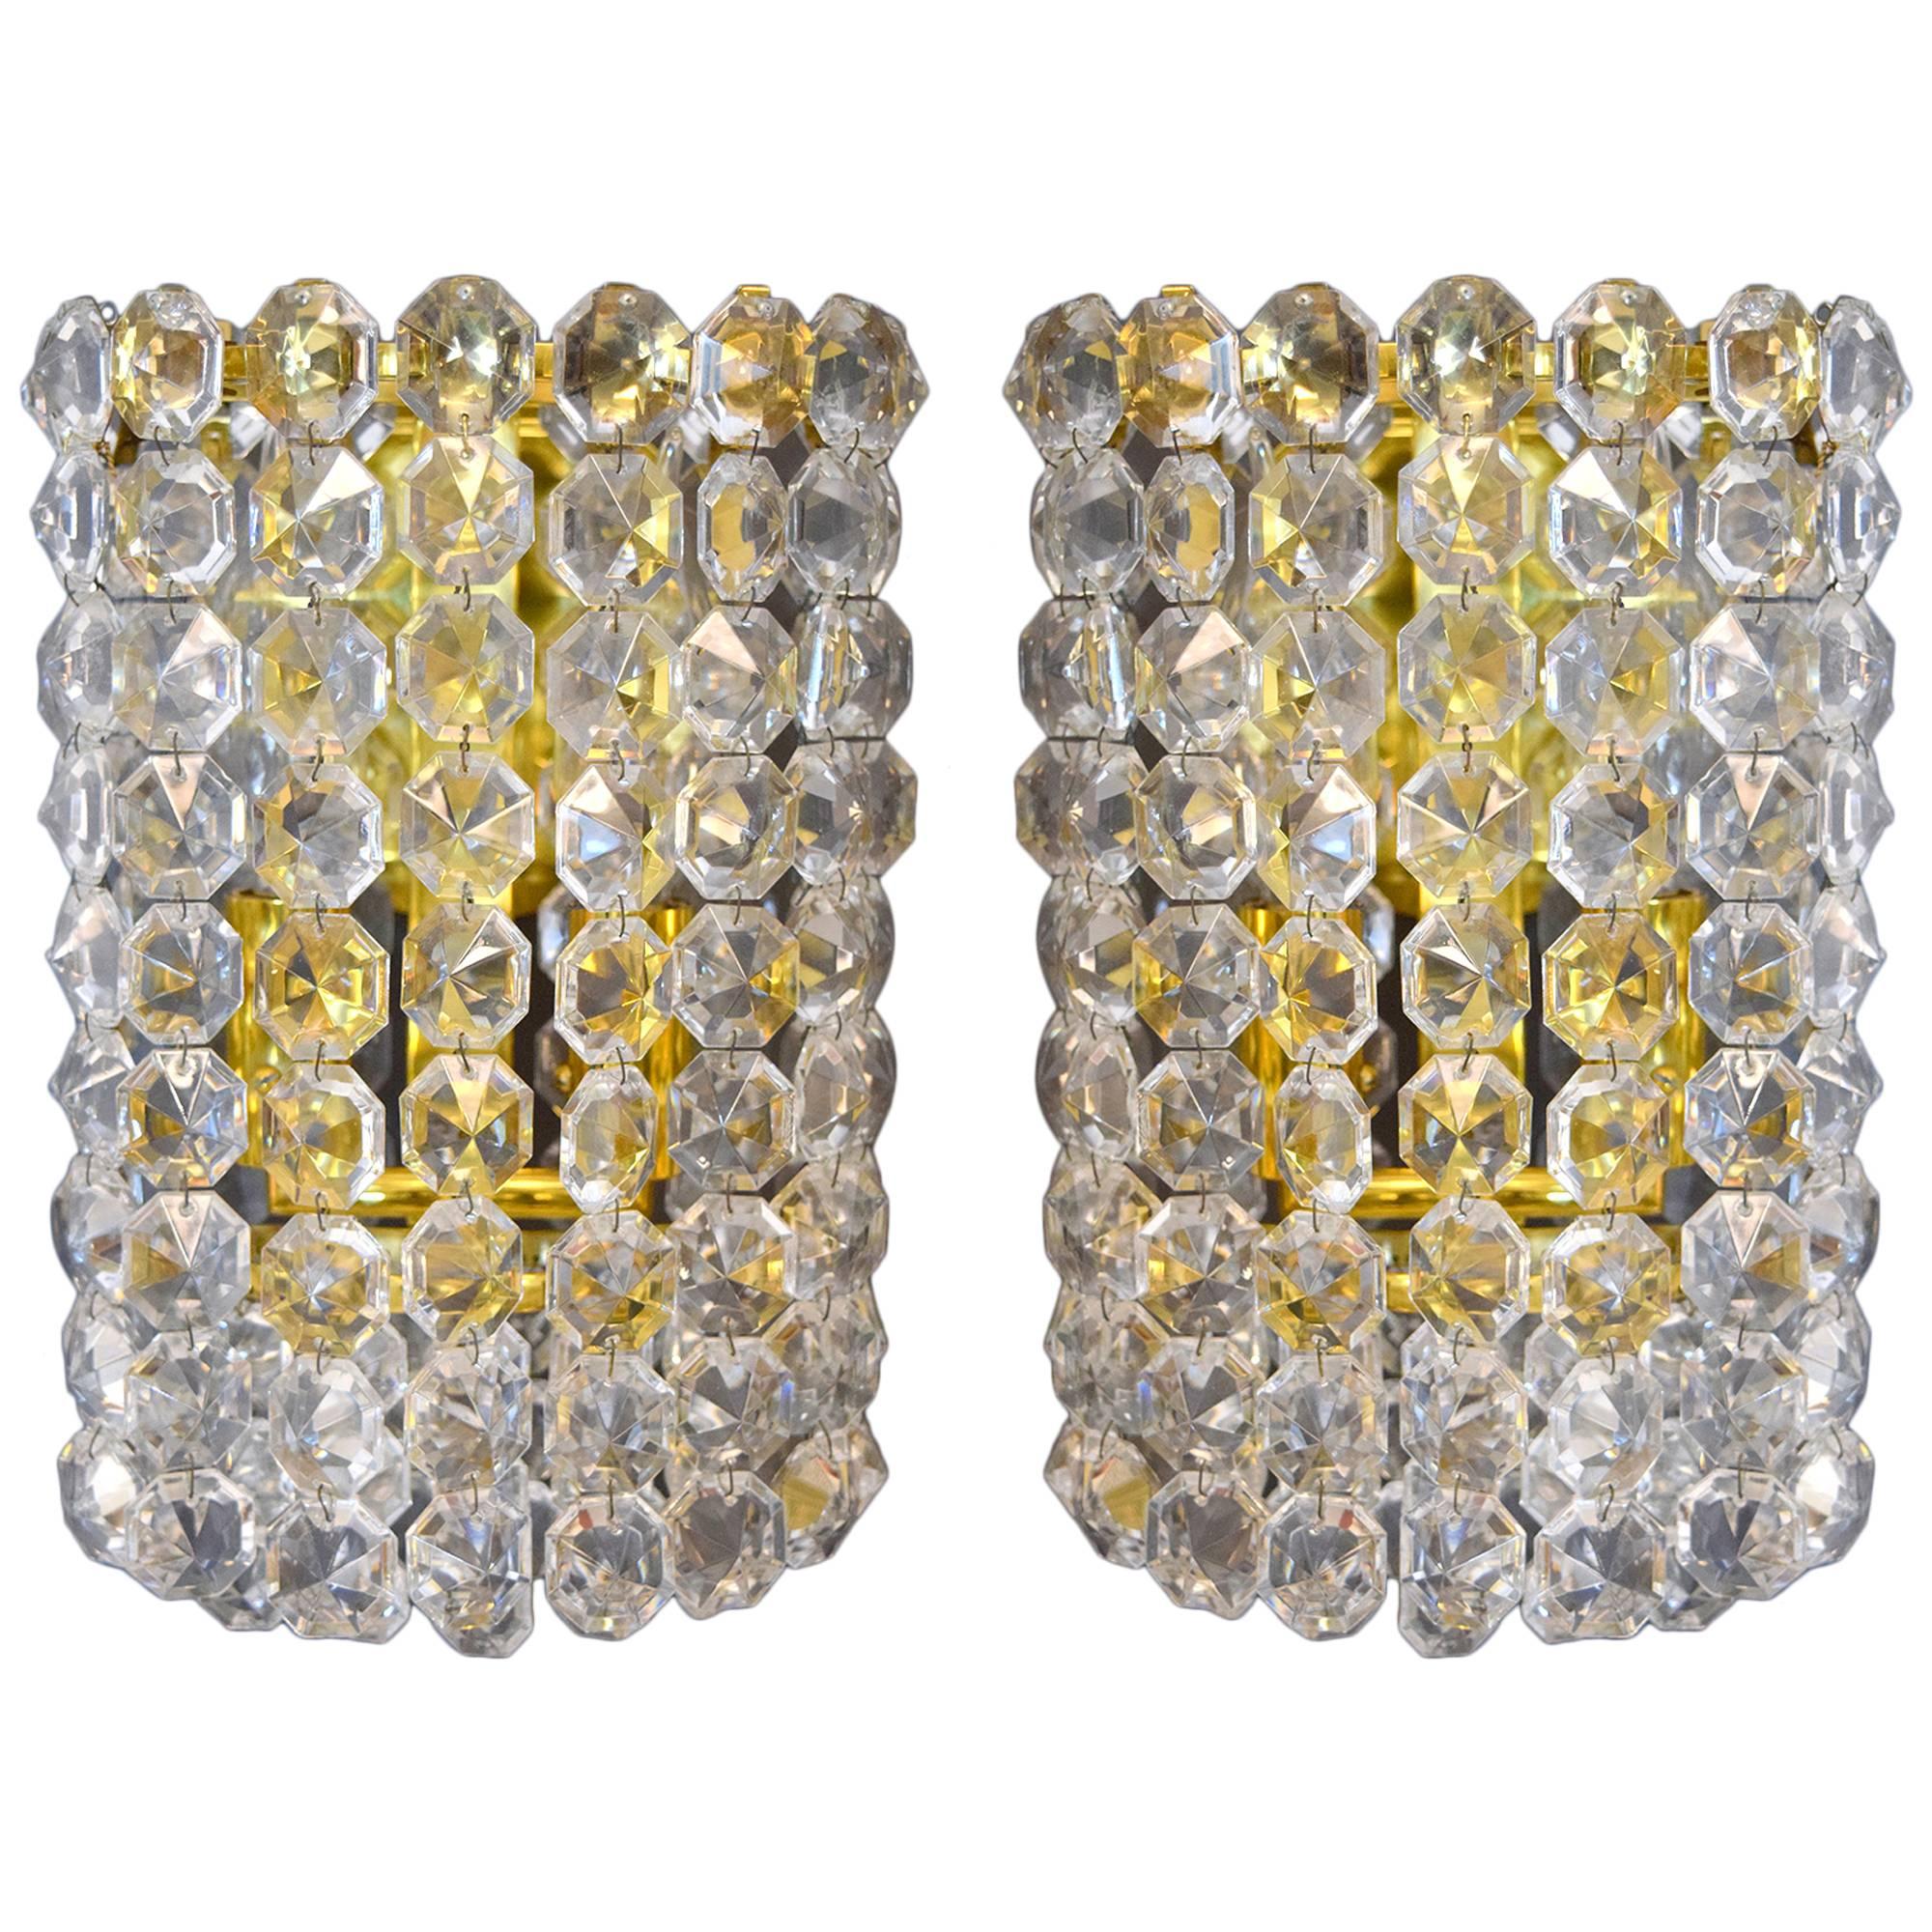 Pair of Austrian Brass and Crystal Wall Sconces